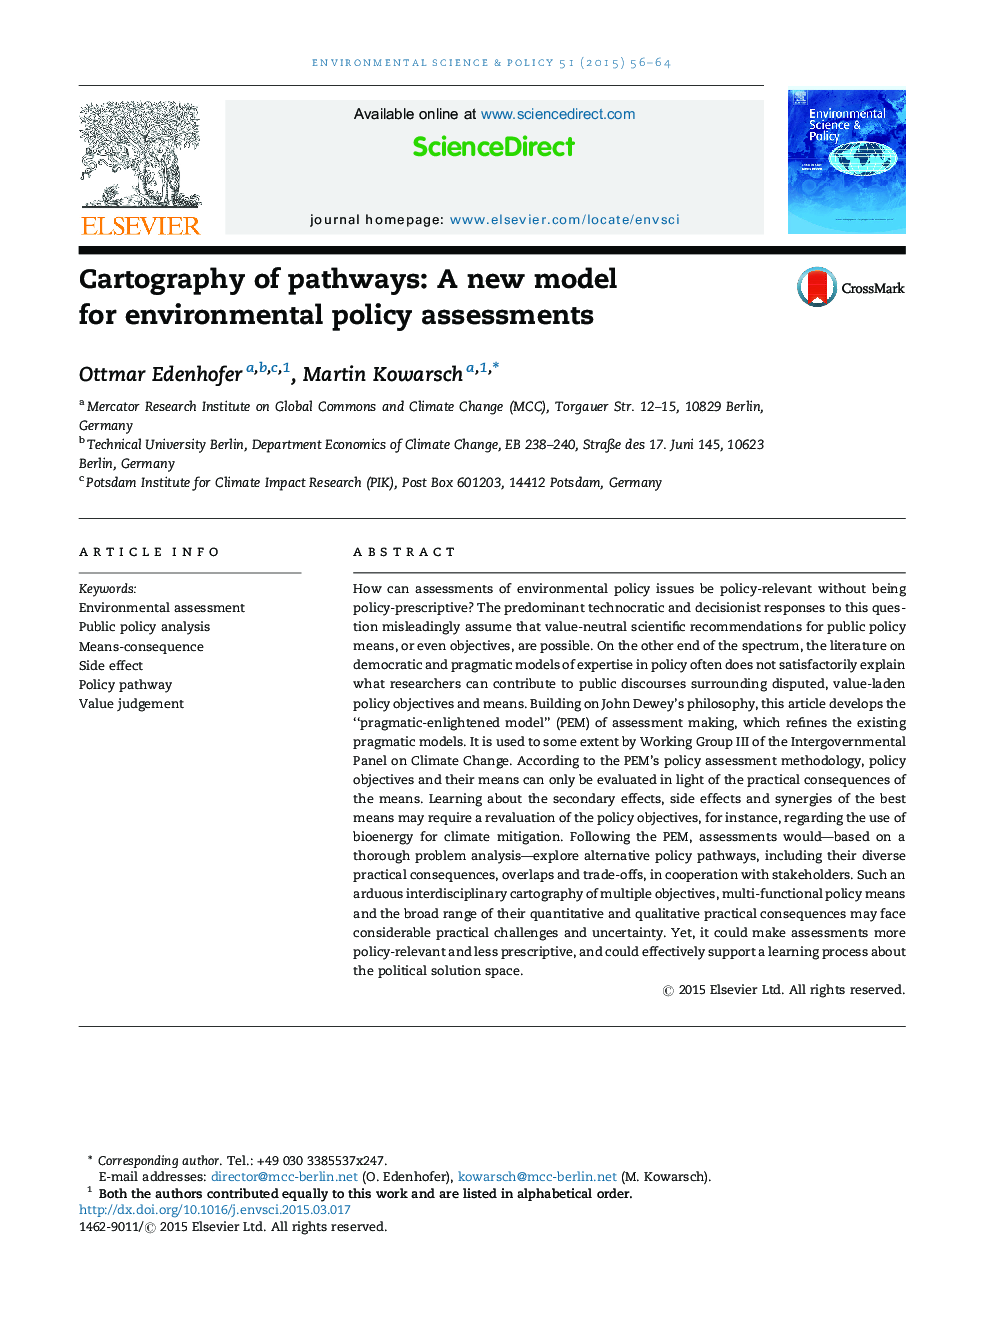 Cartography of pathways: A new model for environmental policy assessments